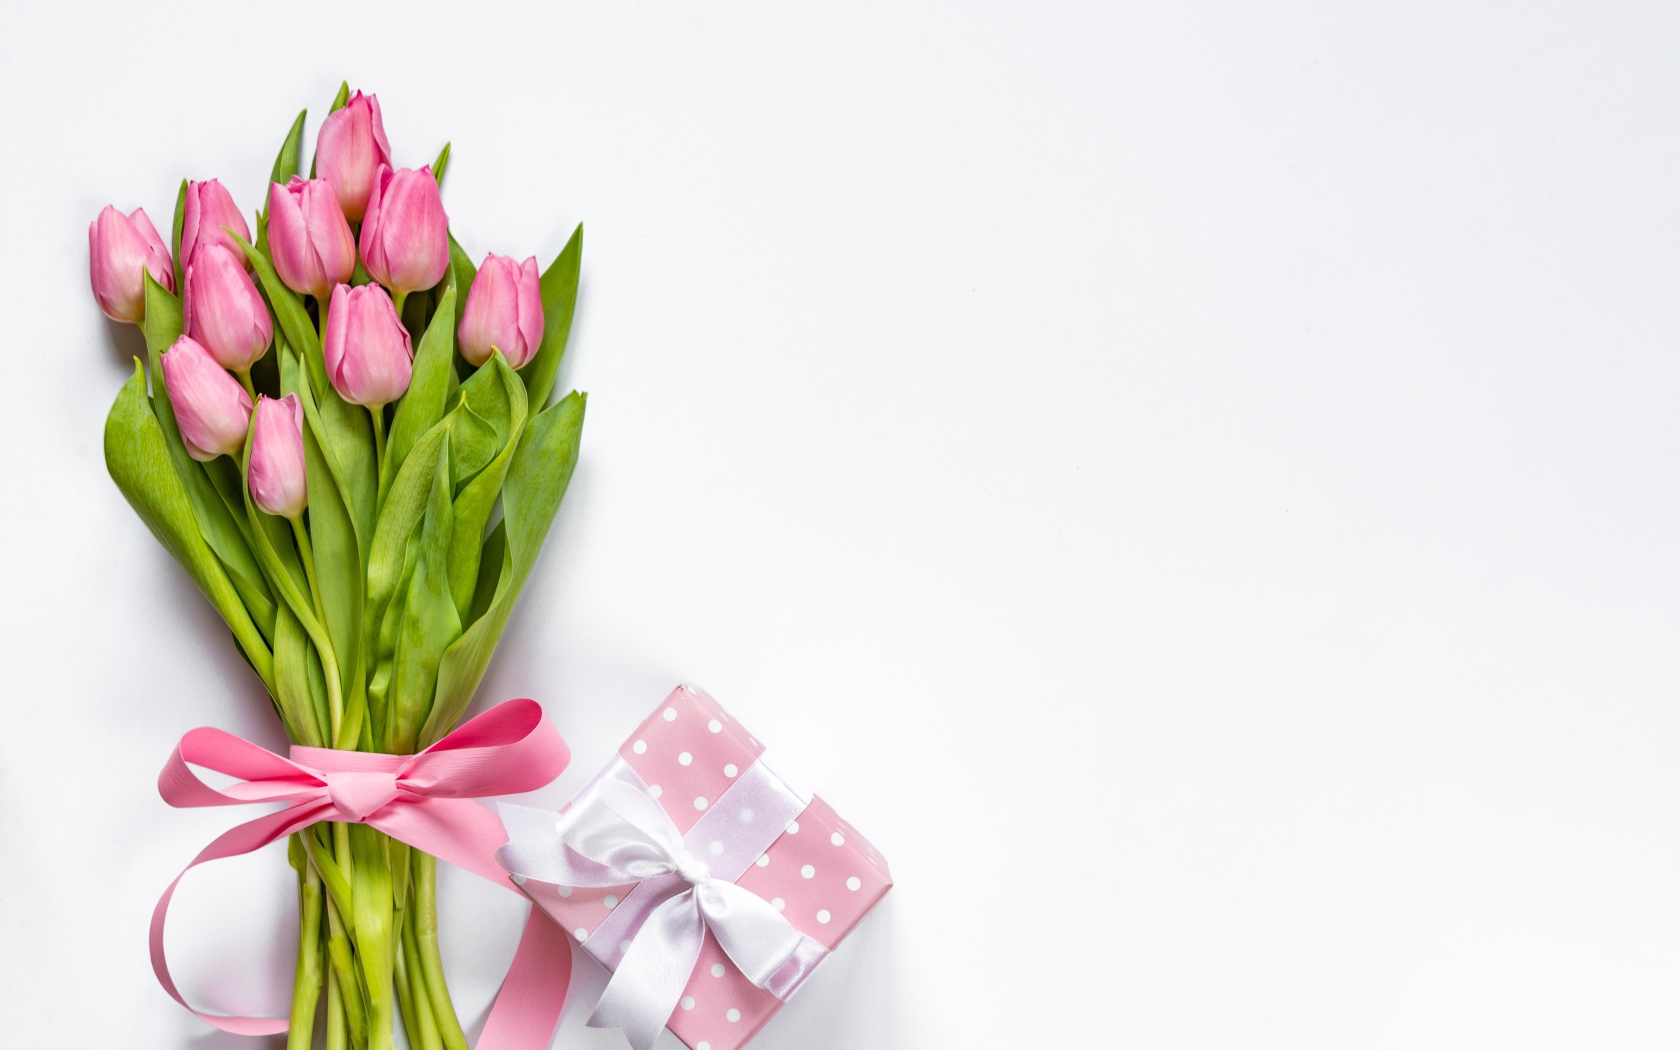 Bouquet of pink tulips with a bow on a white background with a gift